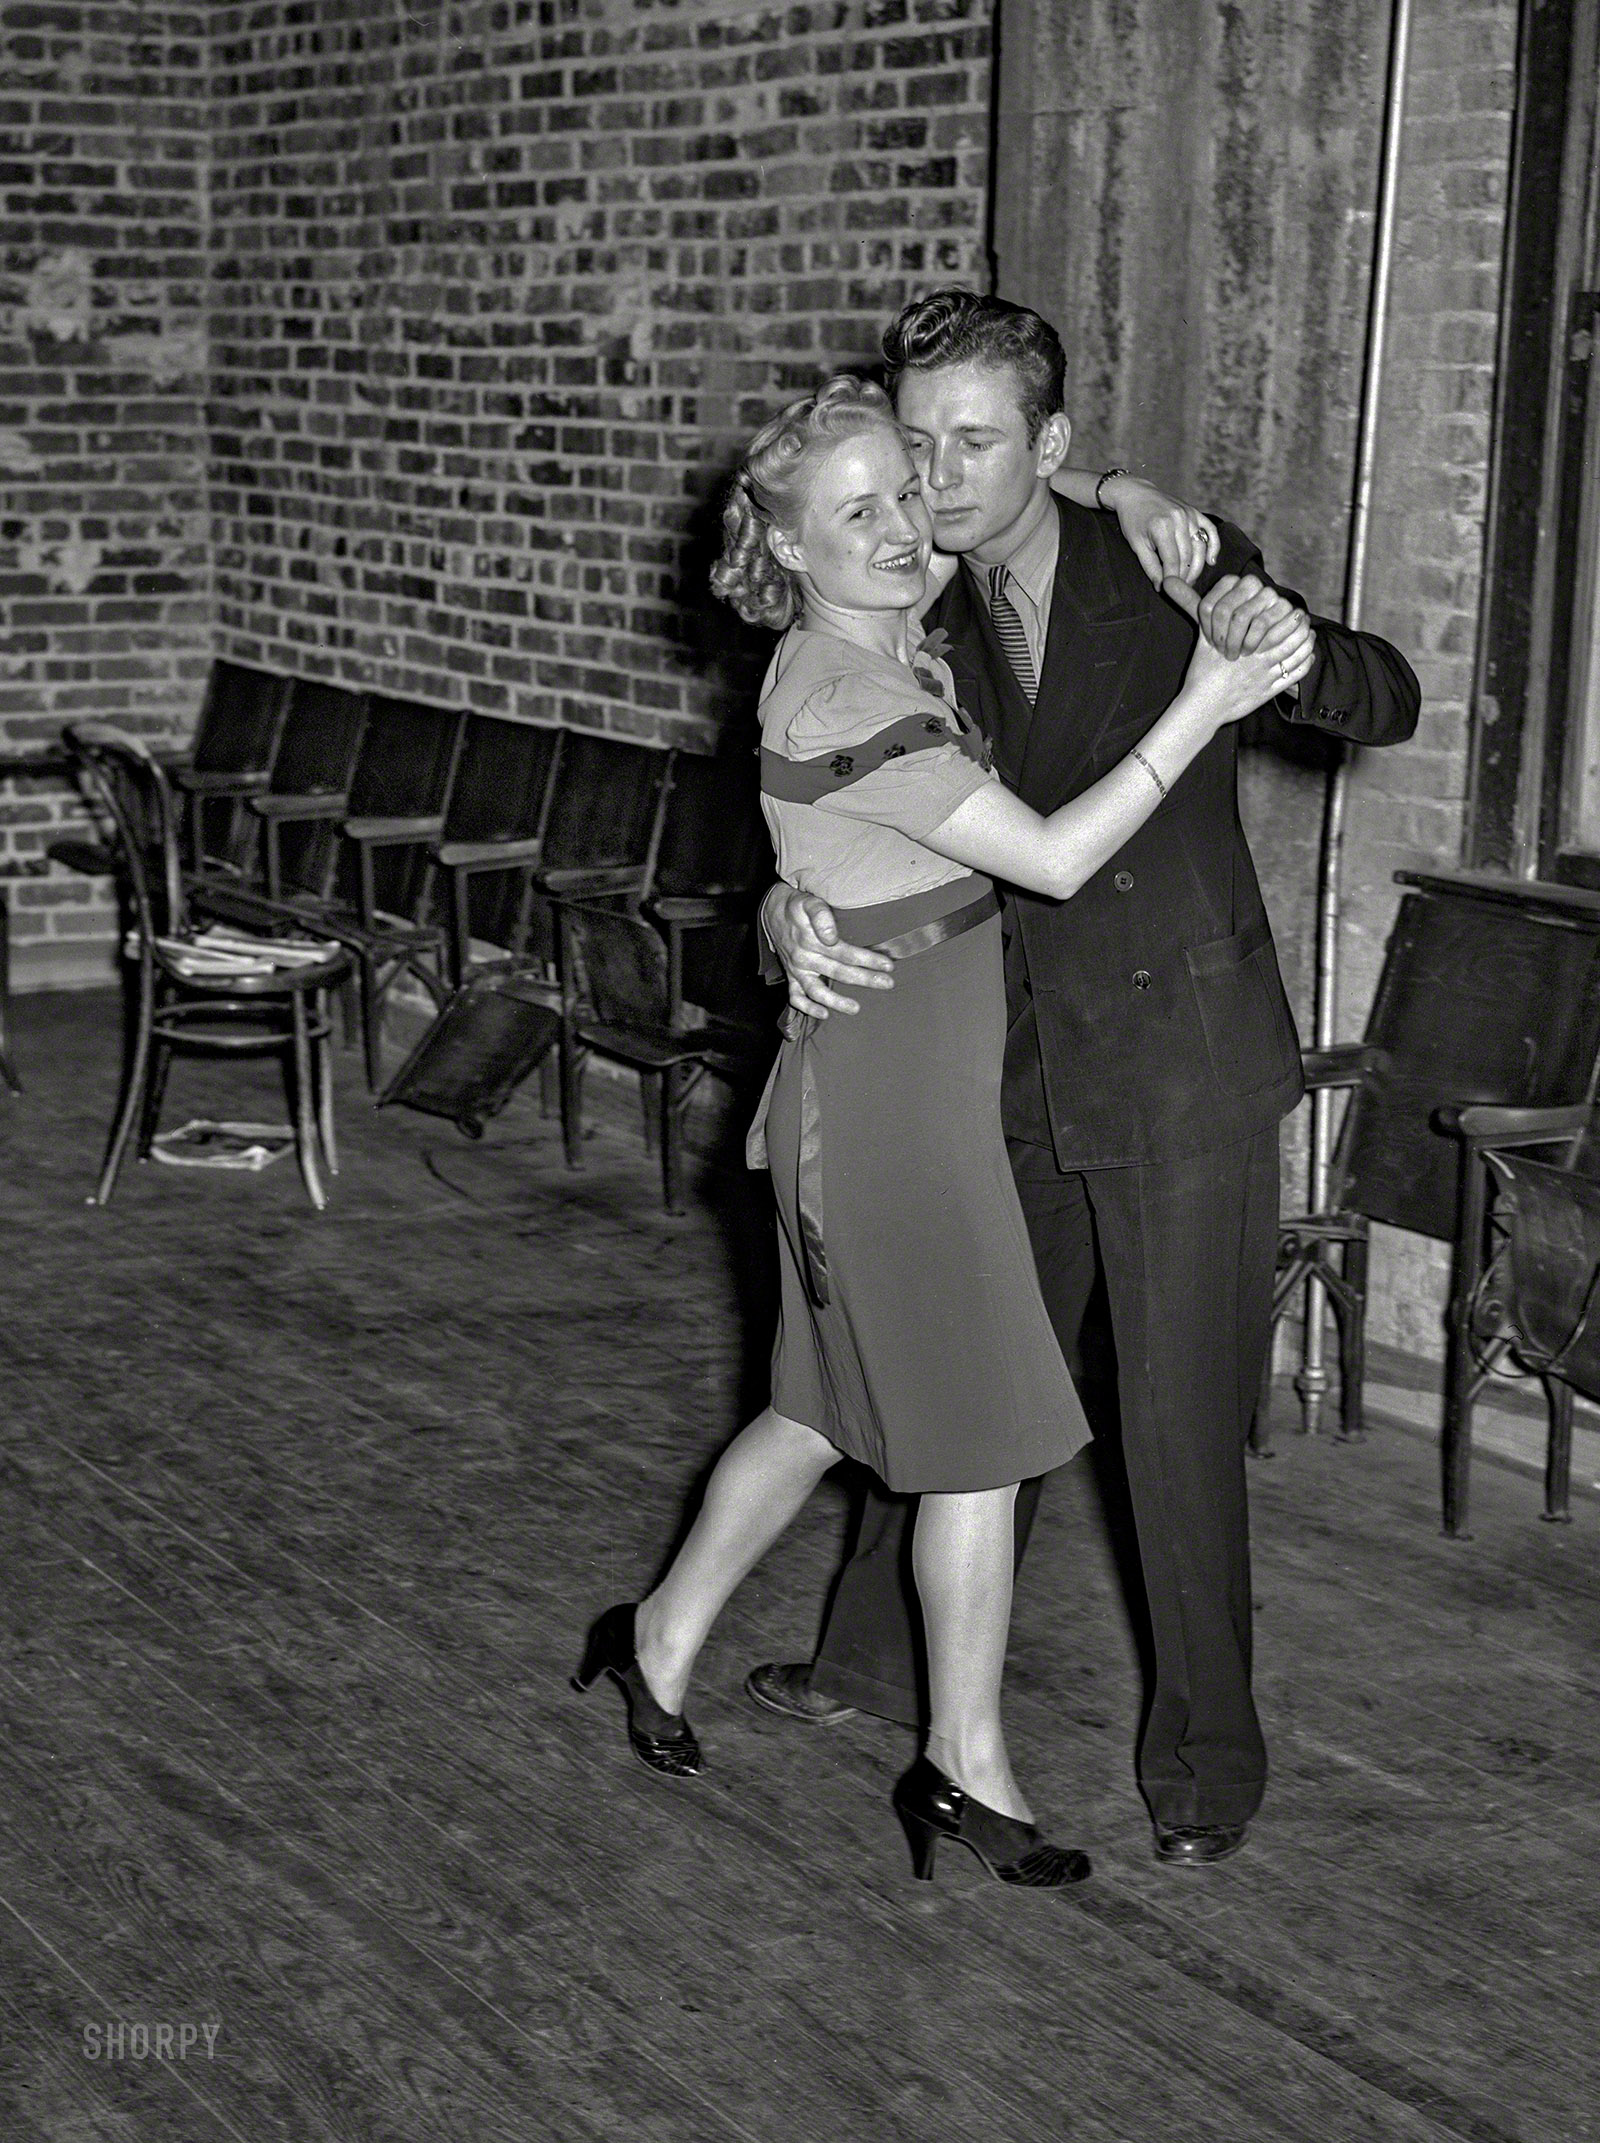 February 1940. "Young couple dancing at Jaycee buffet supper and party. Eufaula, Oklahoma." Photo by Russell Lee for the Farm Security Admin. View full size.